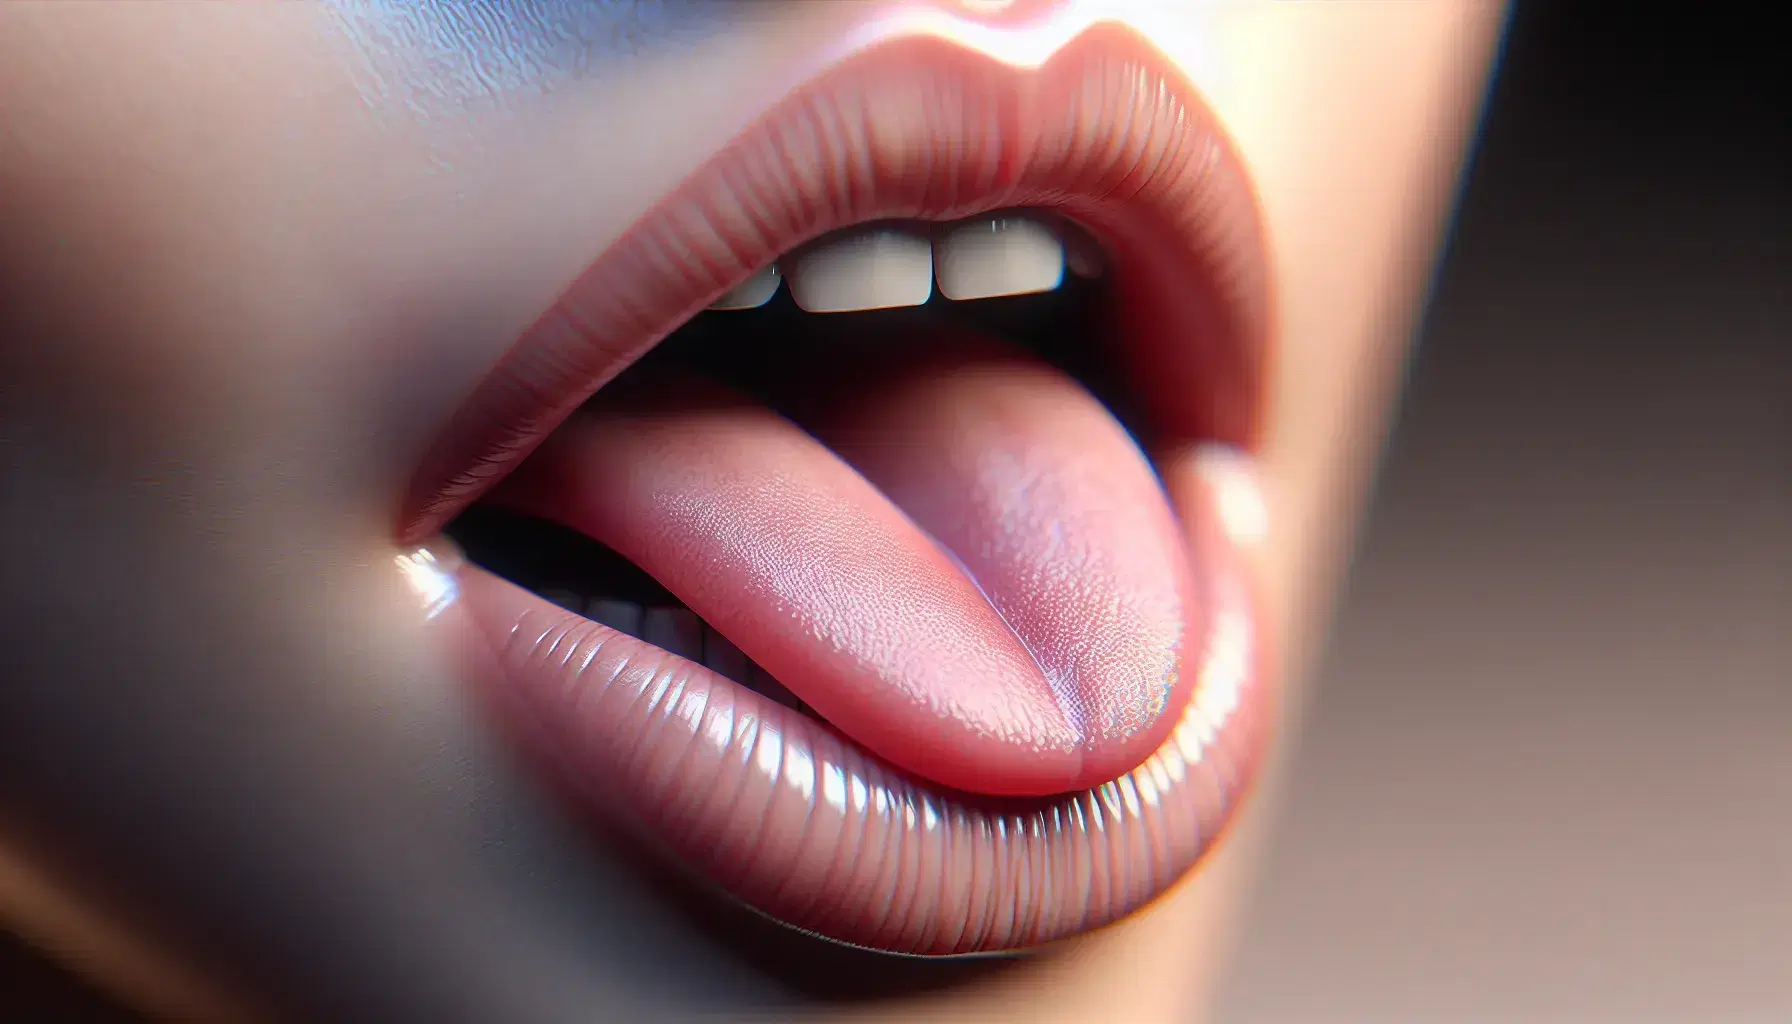 Close-up view of a human mouth with lips parted, tongue raised towards the alveolar ridge, indicating speech articulation, in a blurred background.